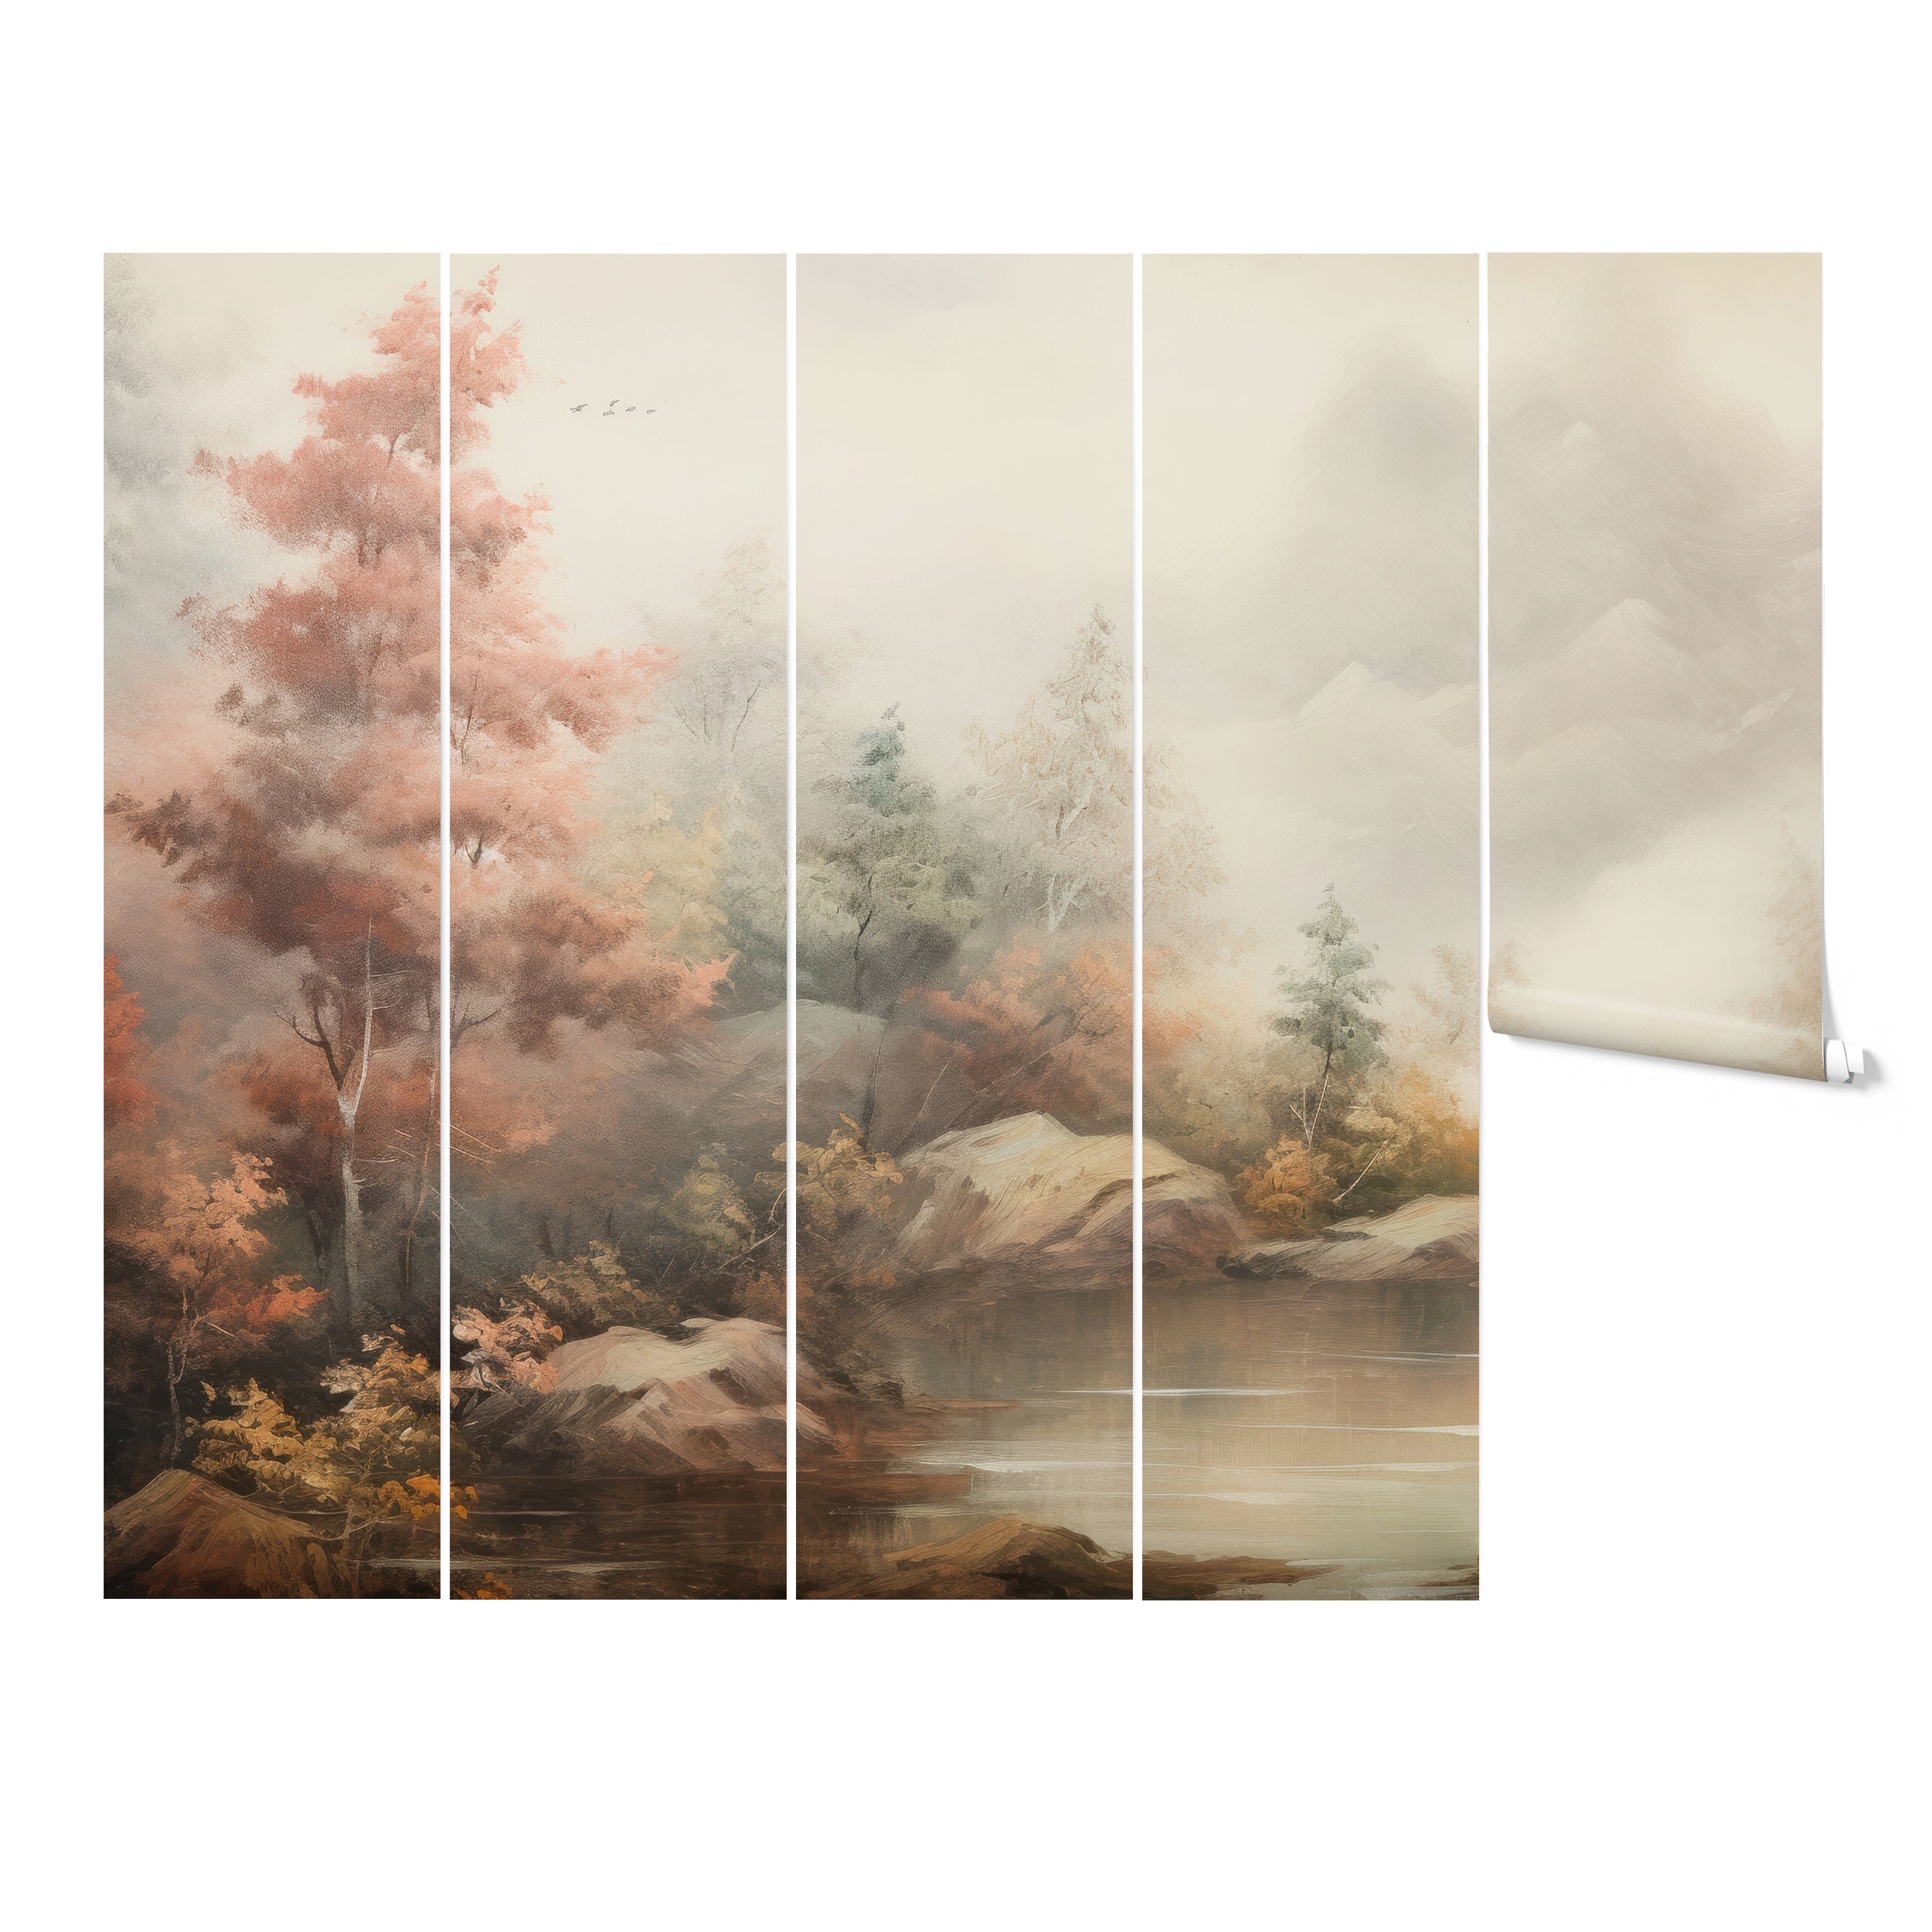 Fall Lake Mural displayed in five panels, showcasing a calm lake surrounded by trees with fall foliage in warm tones of red, orange, and yellow, against a misty mountain backdrop.